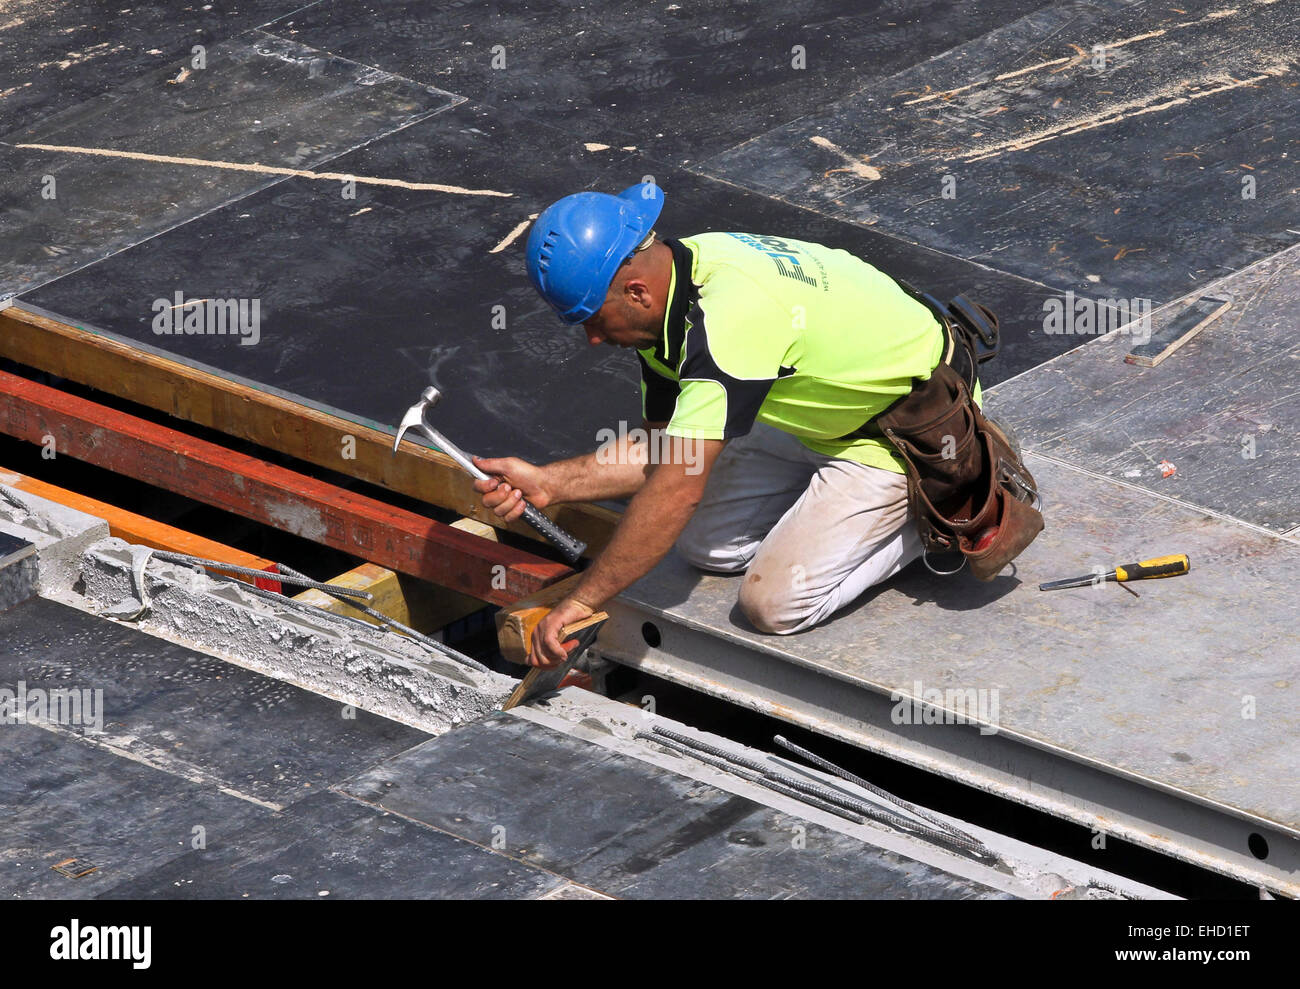 (150312) -- SYDNEY, March 12, 2015 (Xinhua) -- A man works at a construction site in Sydney, Australia, March 12, 2015. Australian unemployment has dropped lower to 6.3 percent in February with more than 15,600 new jobs added to the economy, the Australian Bureau of Statistics (ABS) announced on Thursday. (Xinhua/Jin Linpeng) Stock Photo